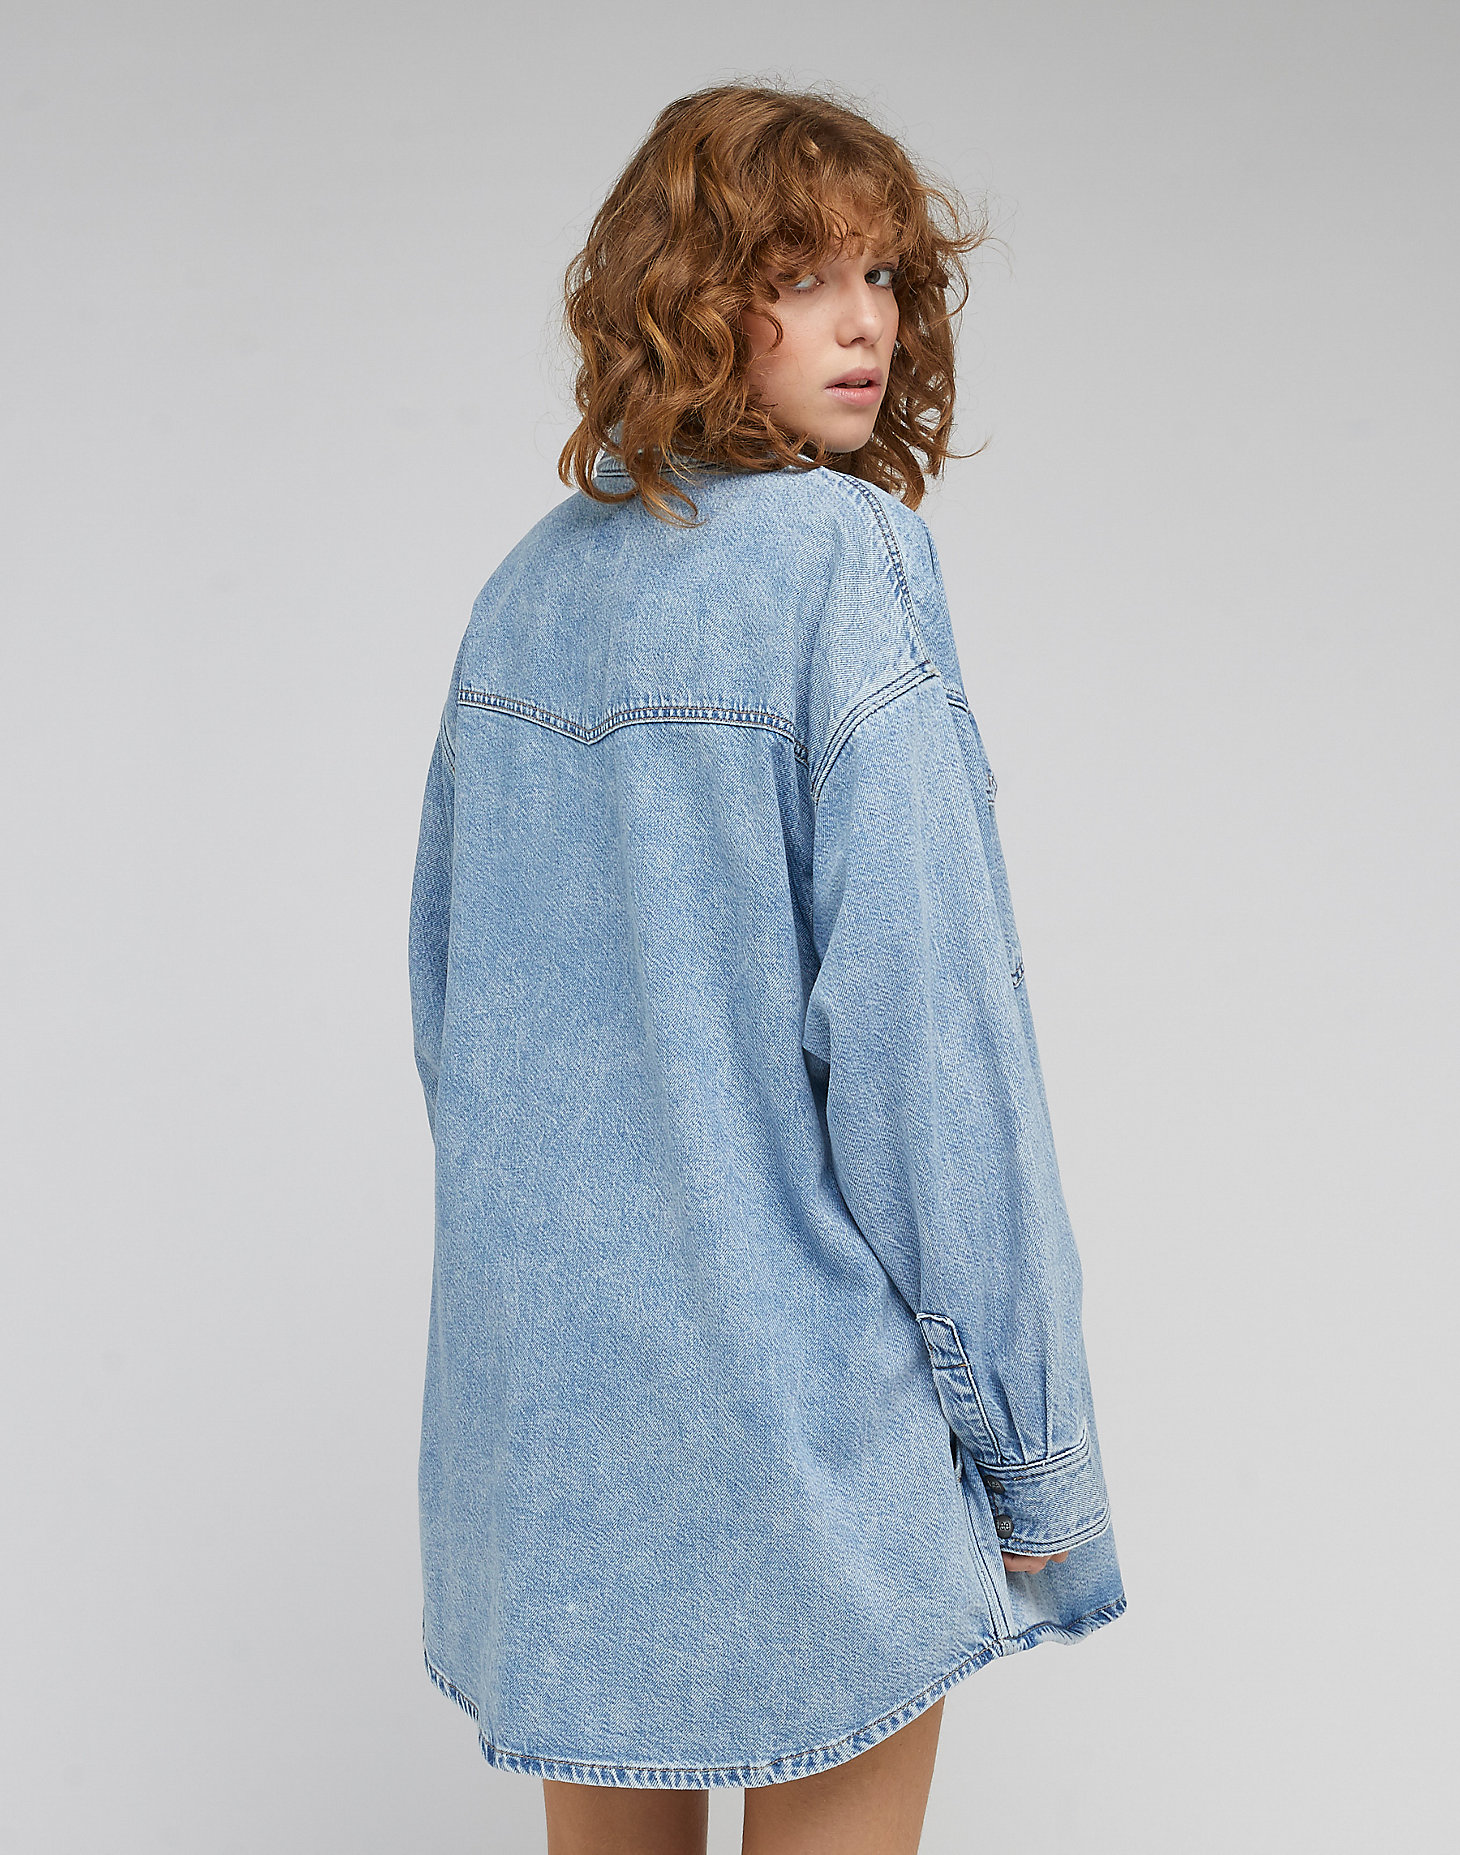 Western Overshirt in Frosted Blue alternative view 1